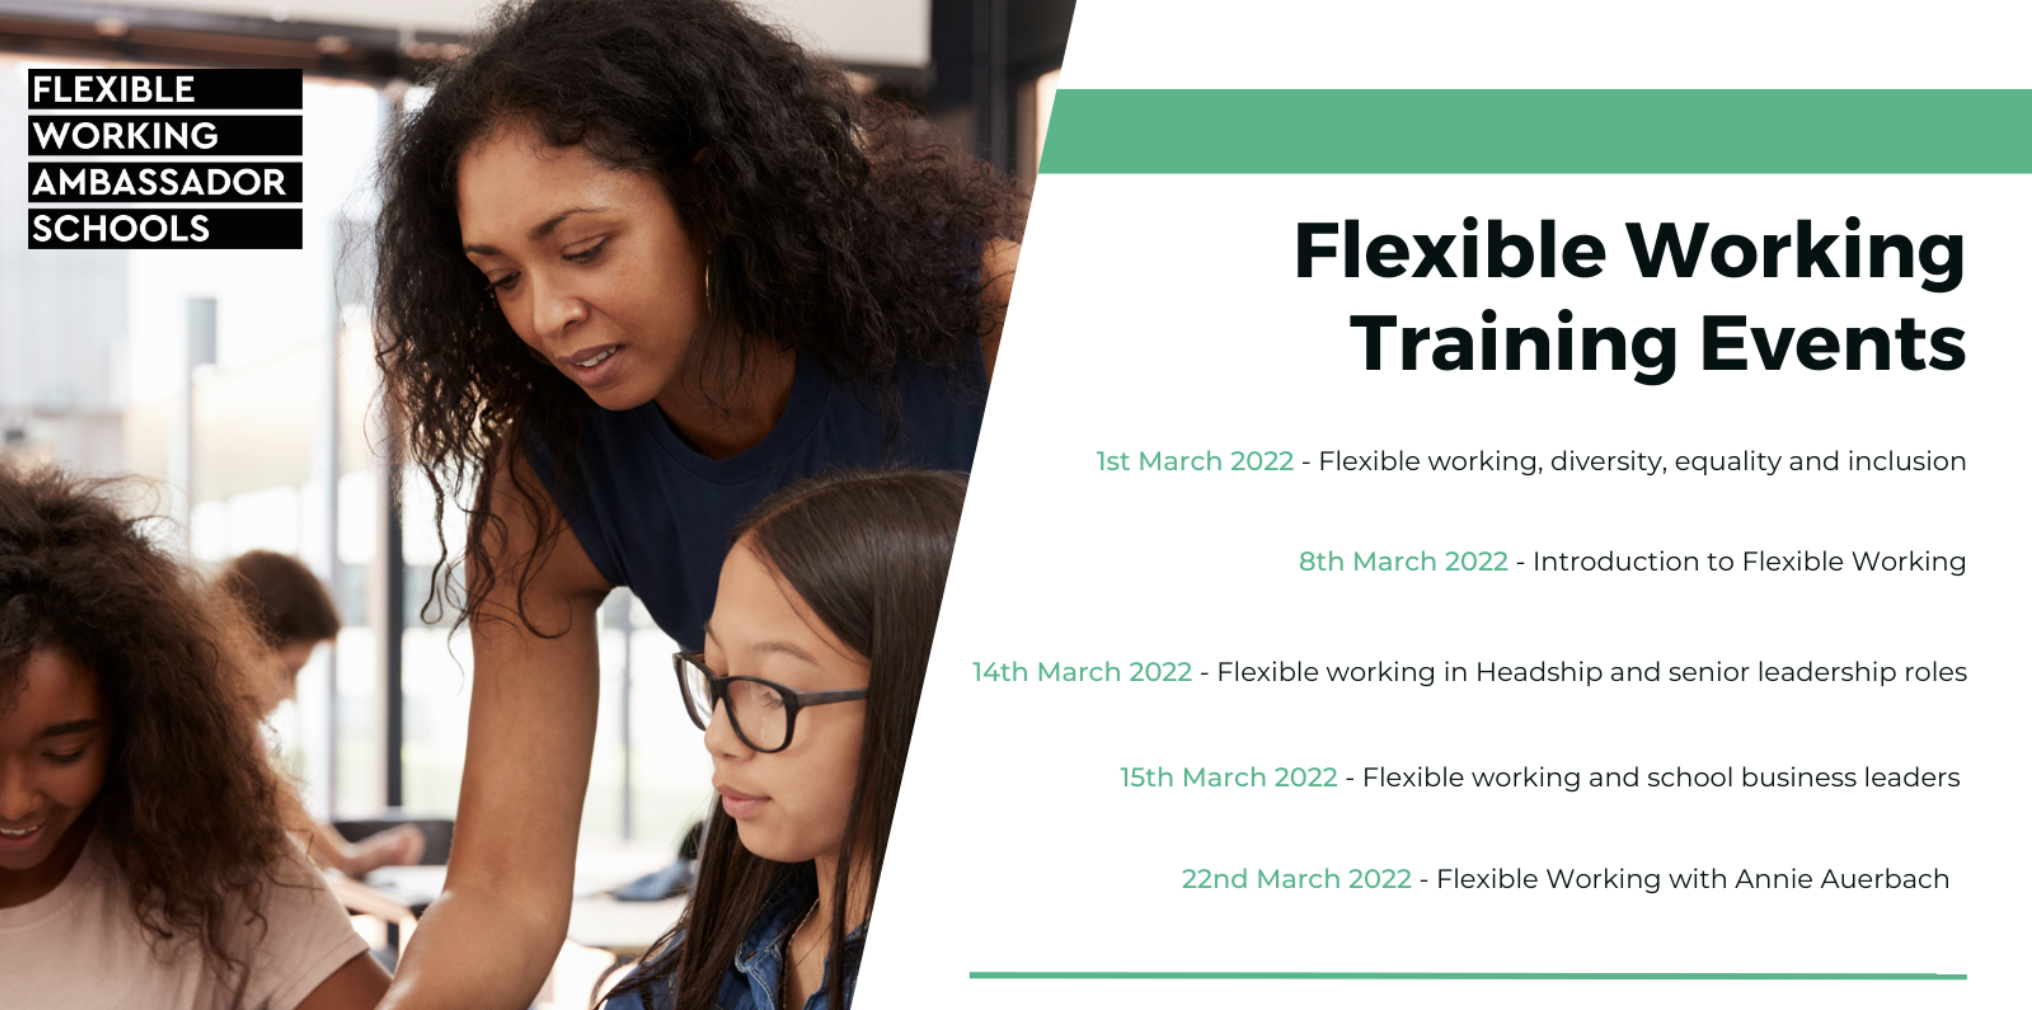 Flexible Working in Headship and Senior Leadership Roles